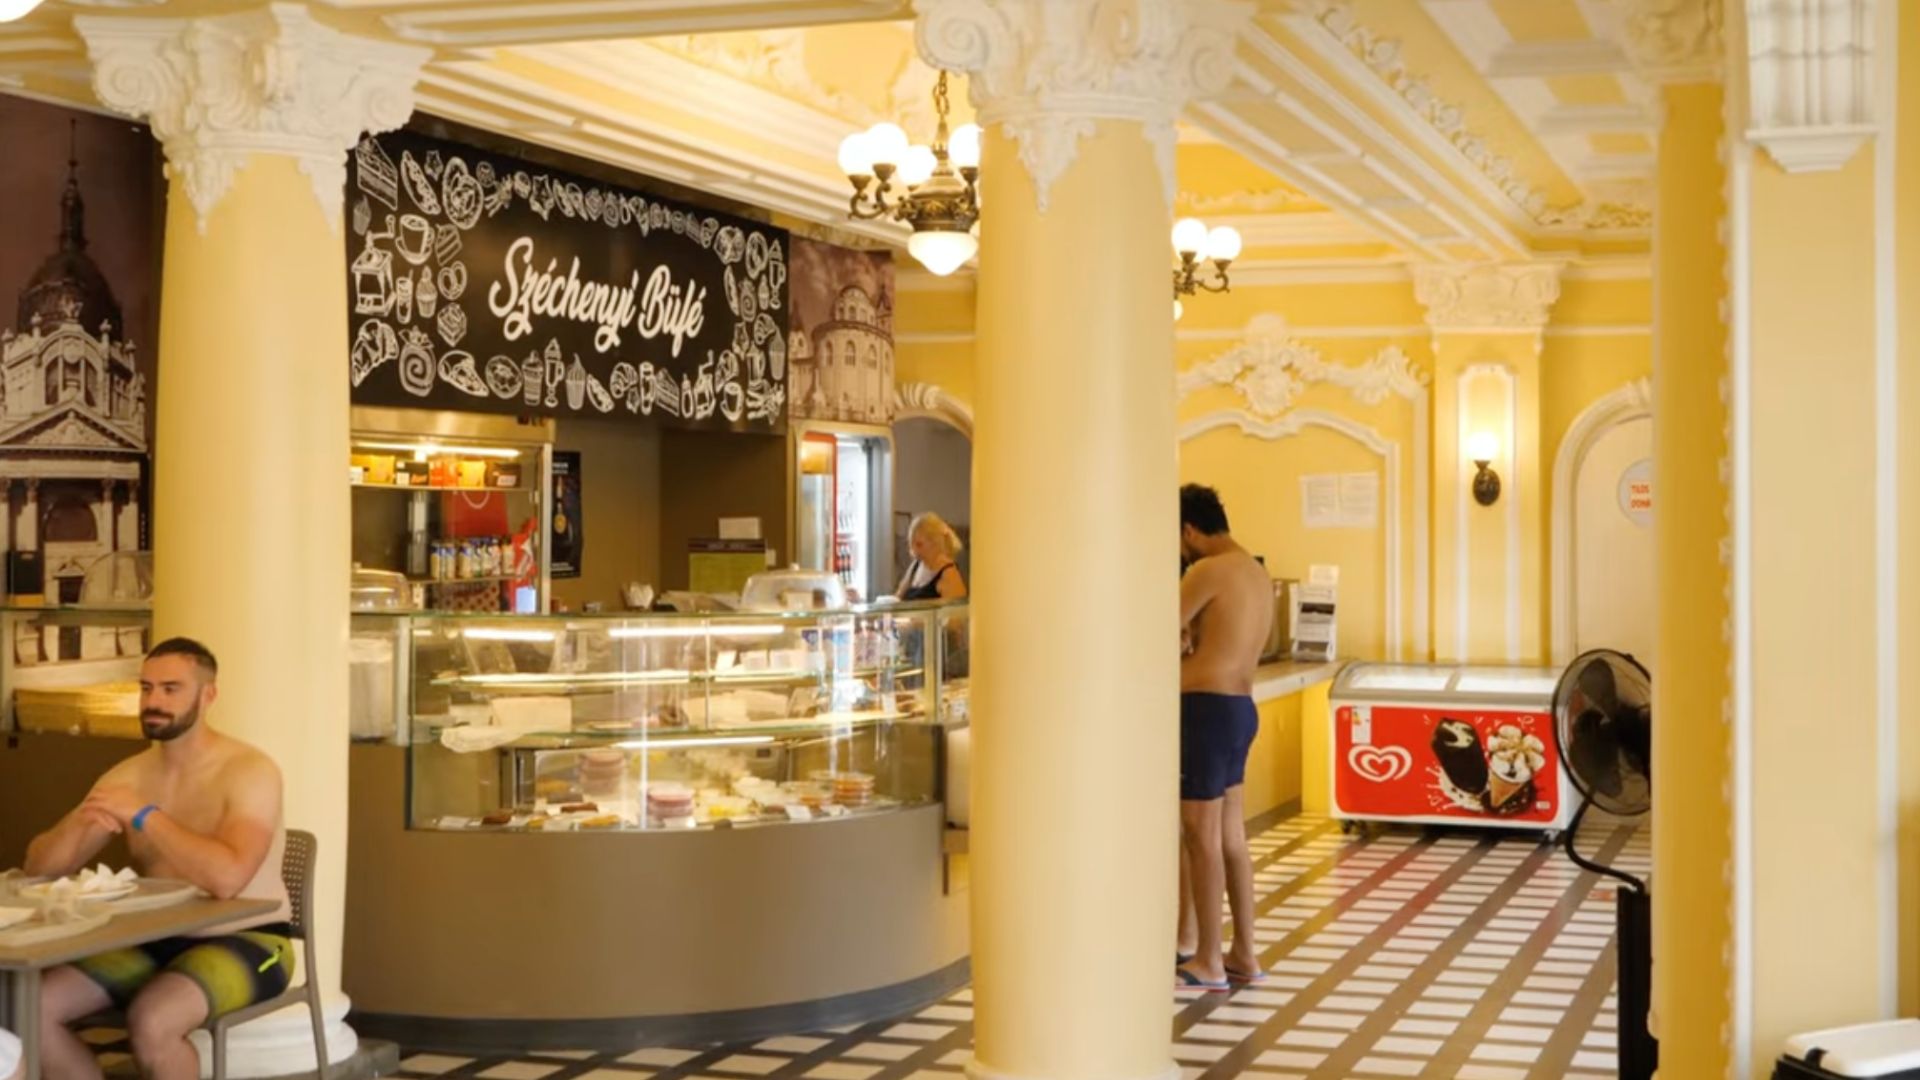 Széchenyi Café with people sitting and food display